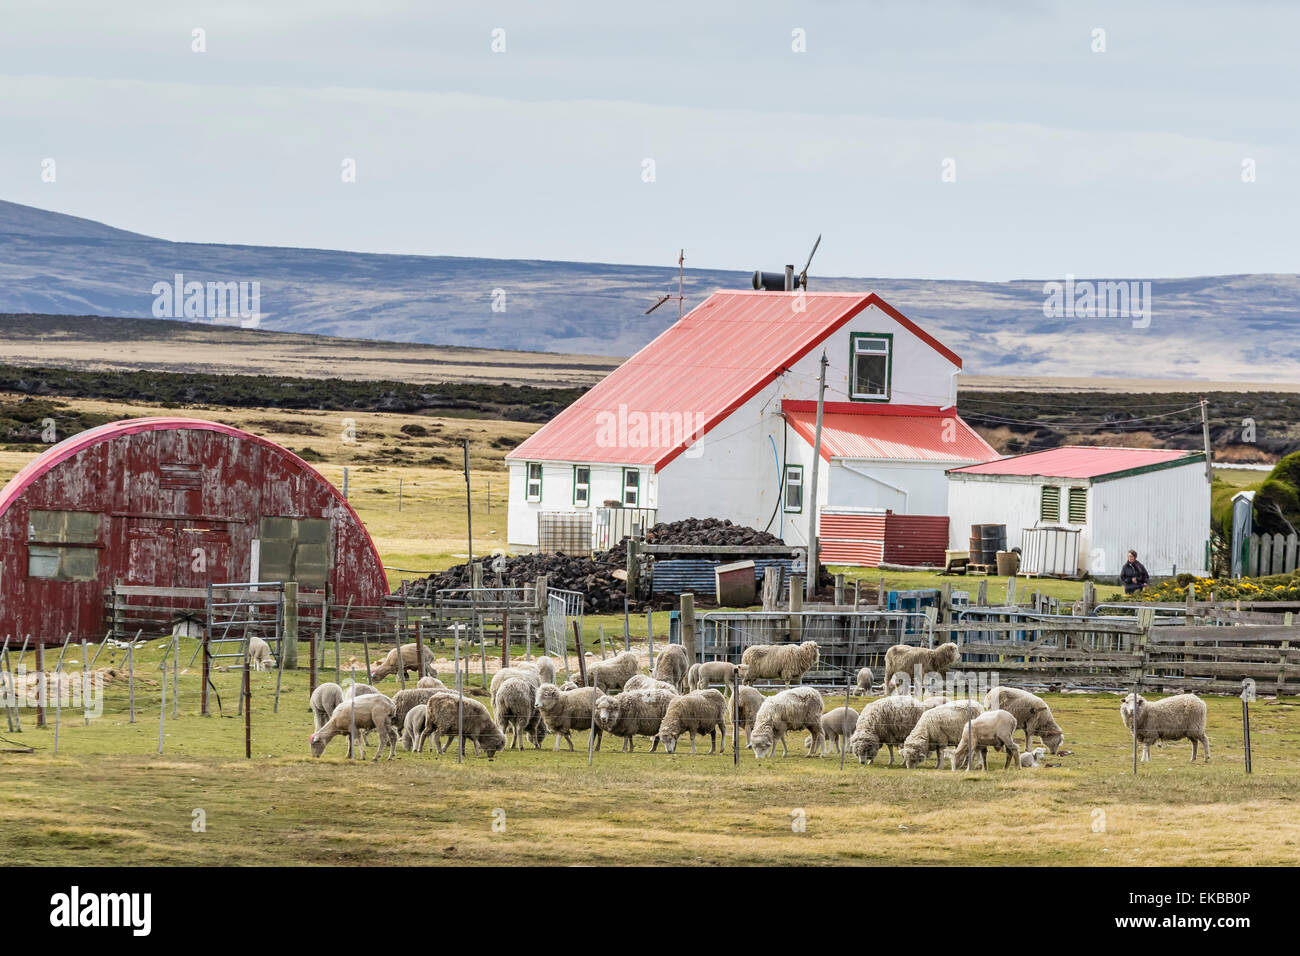 Sheep waiting to be shorn at Long Island sheep Farms, outside Stanley, Falkland Islands, U.K. Overseas Protectorate Stock Photo